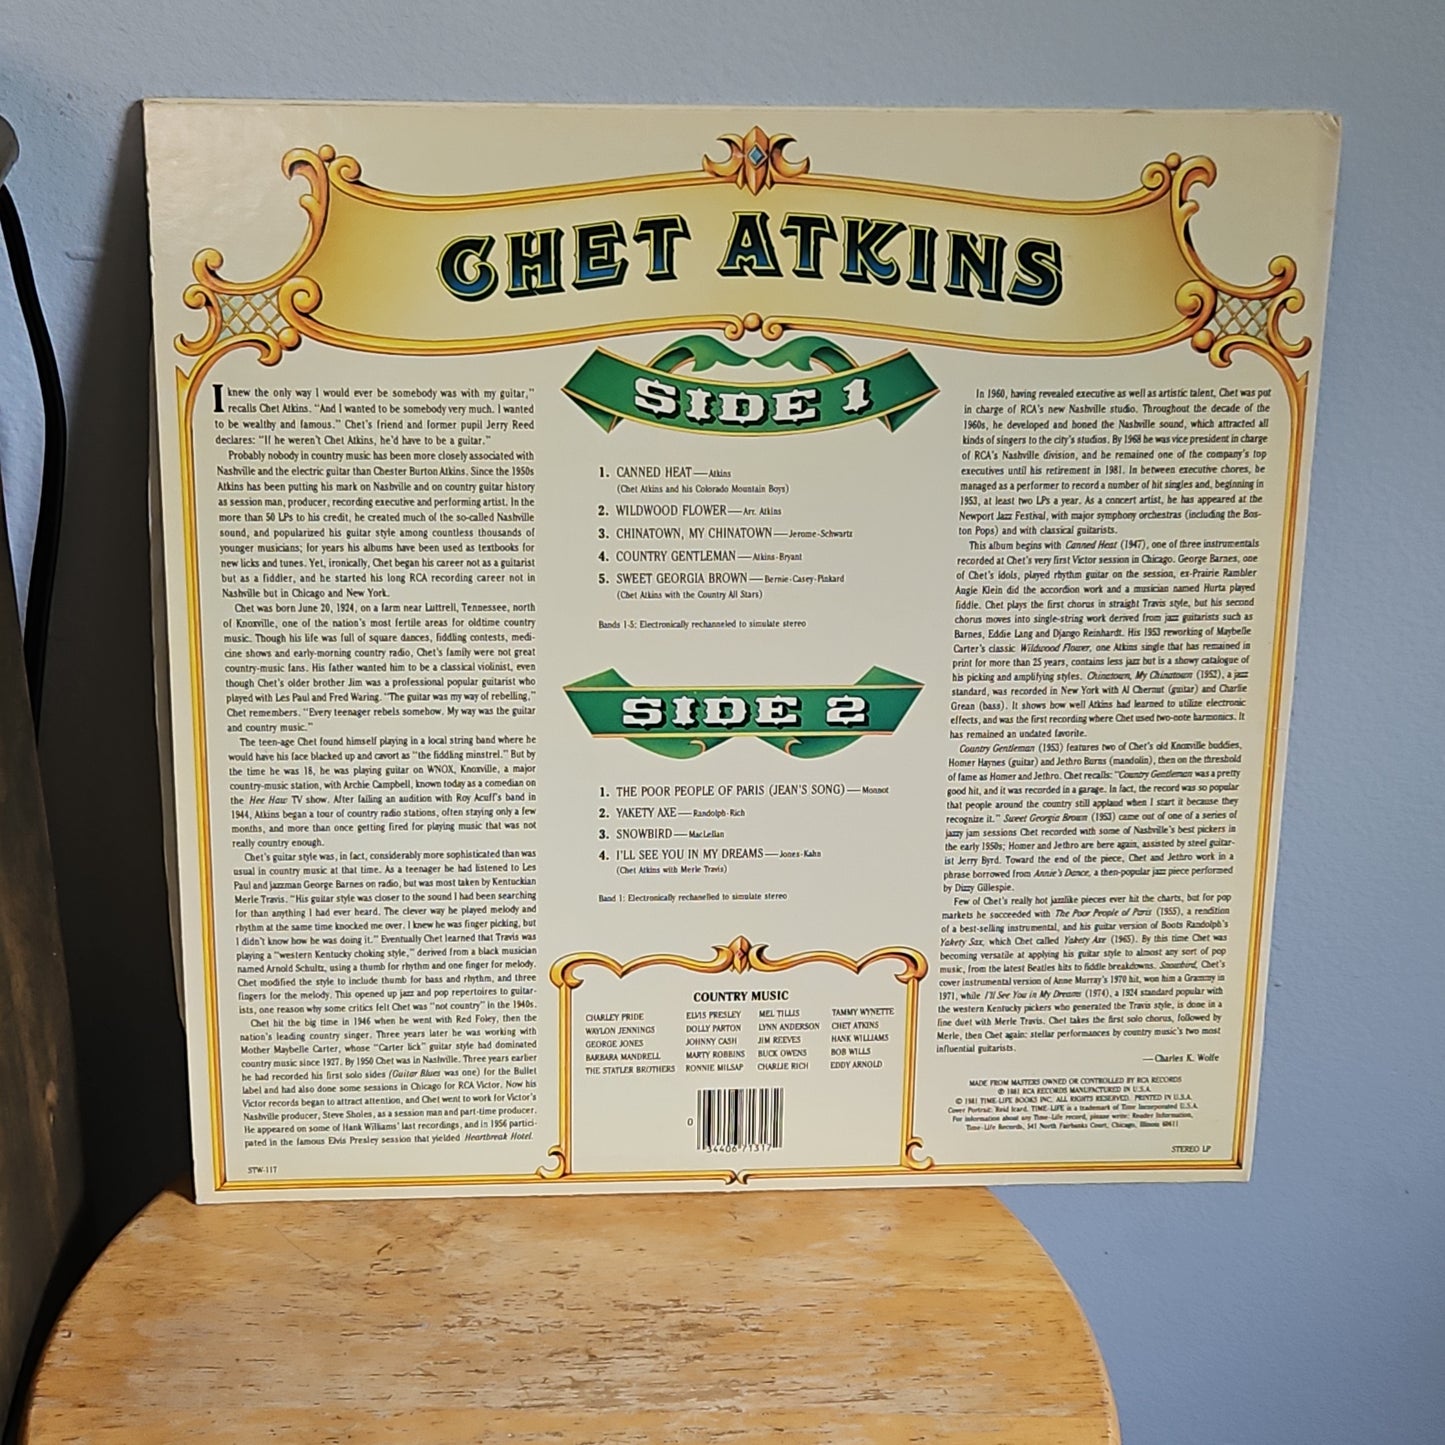 Chet Atkins Country Music By Time Life Records